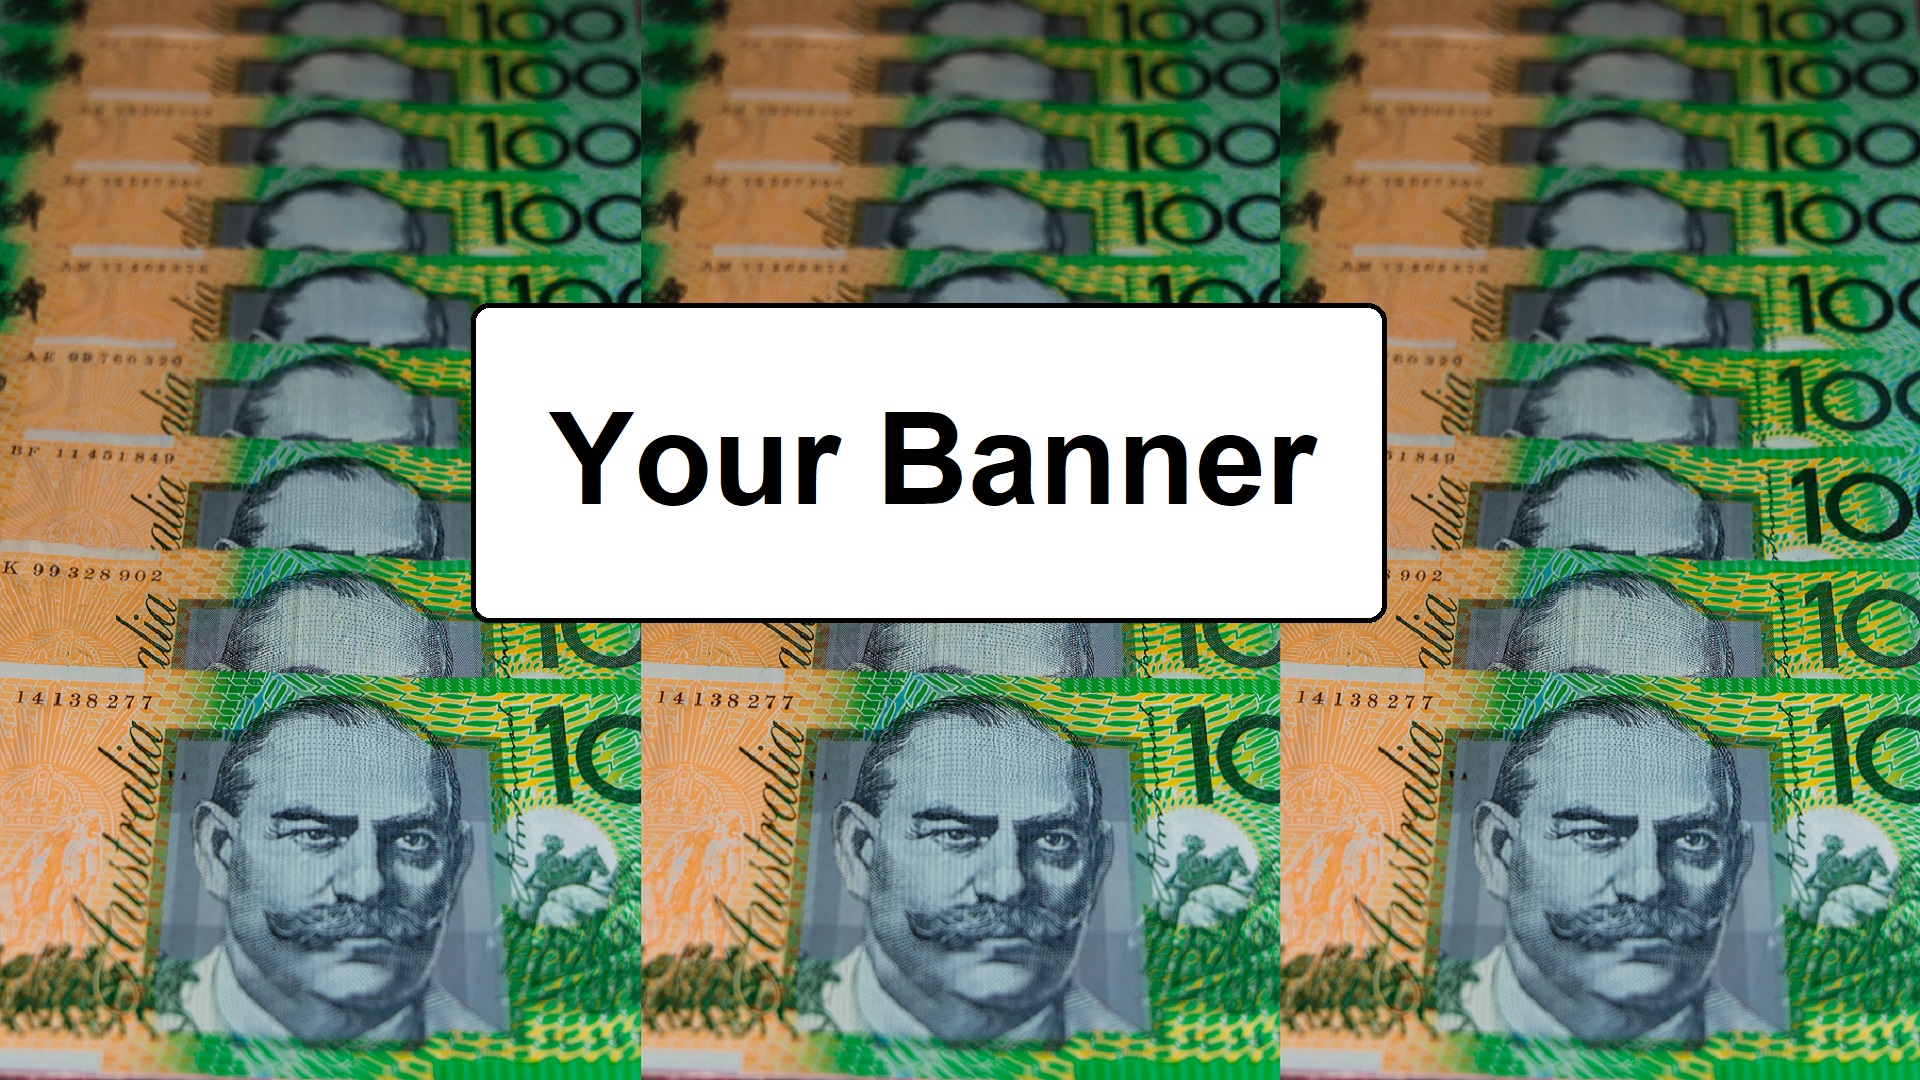 Your Banner sign over $100 bills